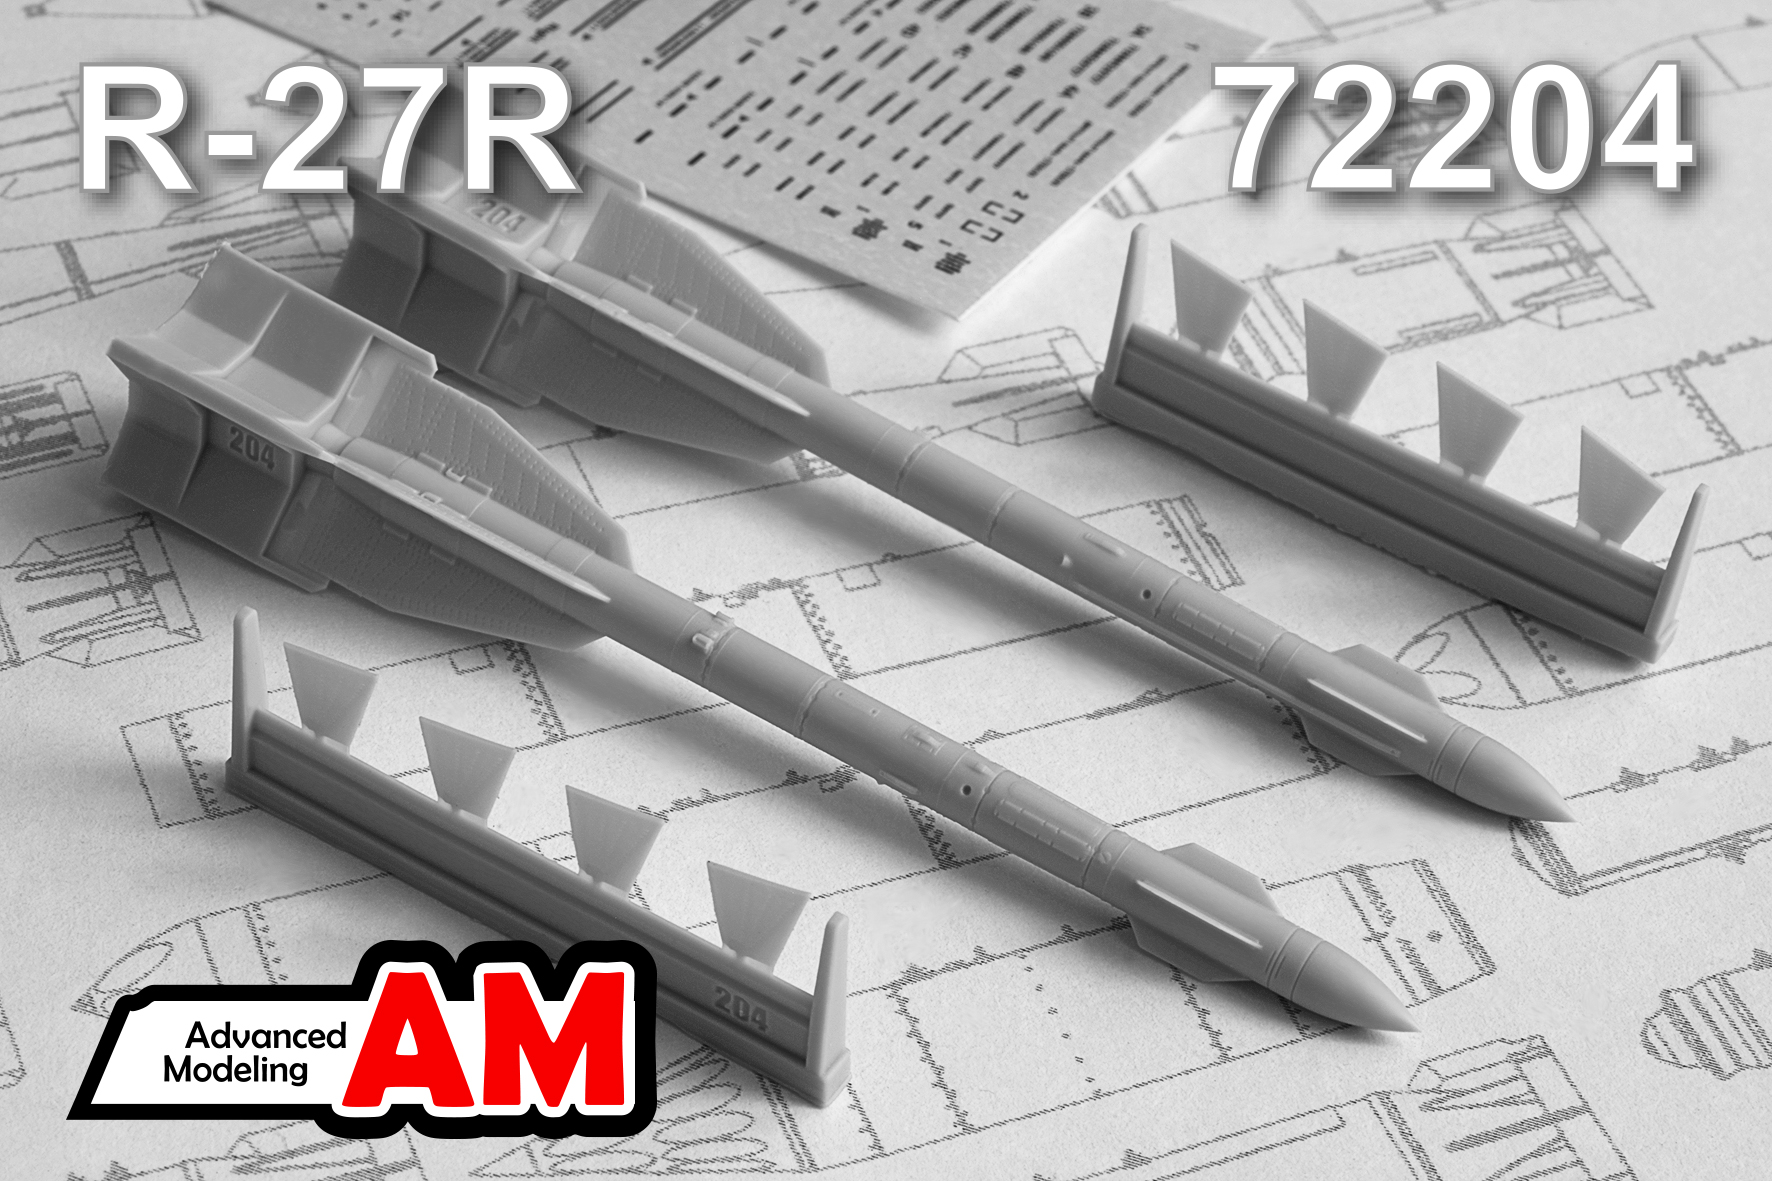 Additions (3D resin printing) 1/72 R-27R Air to Air missile (Advanced Modeling) 